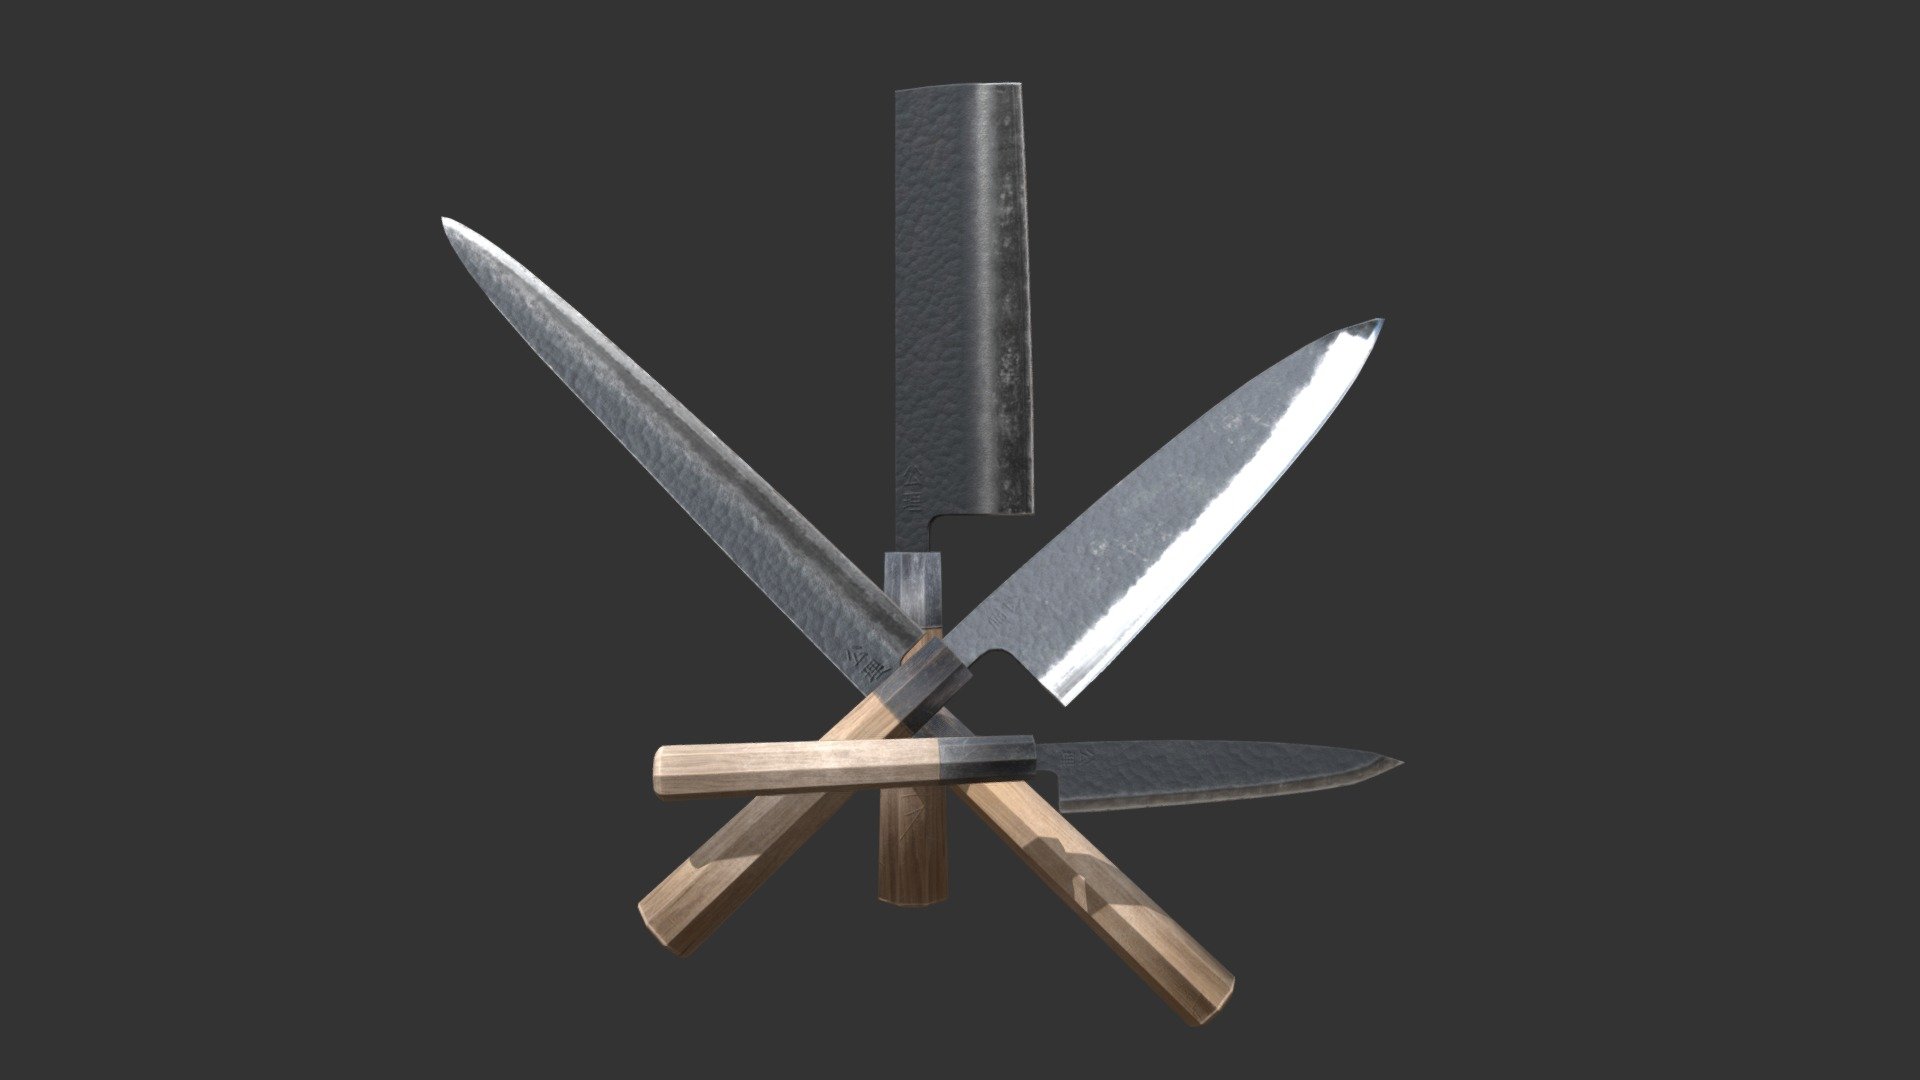 A set of Japanese chef knives. This set contains a Yanagi knife (the long one), a Santoku knife (the normal sized one), a Paring knife (the small one), and an Usuba knife (the cleaver one). Each knife has a hammered Kurouchi finish. A rustic style where only the edge is finished.

Models were made in Blender, and textured in Substance Painter 3d model